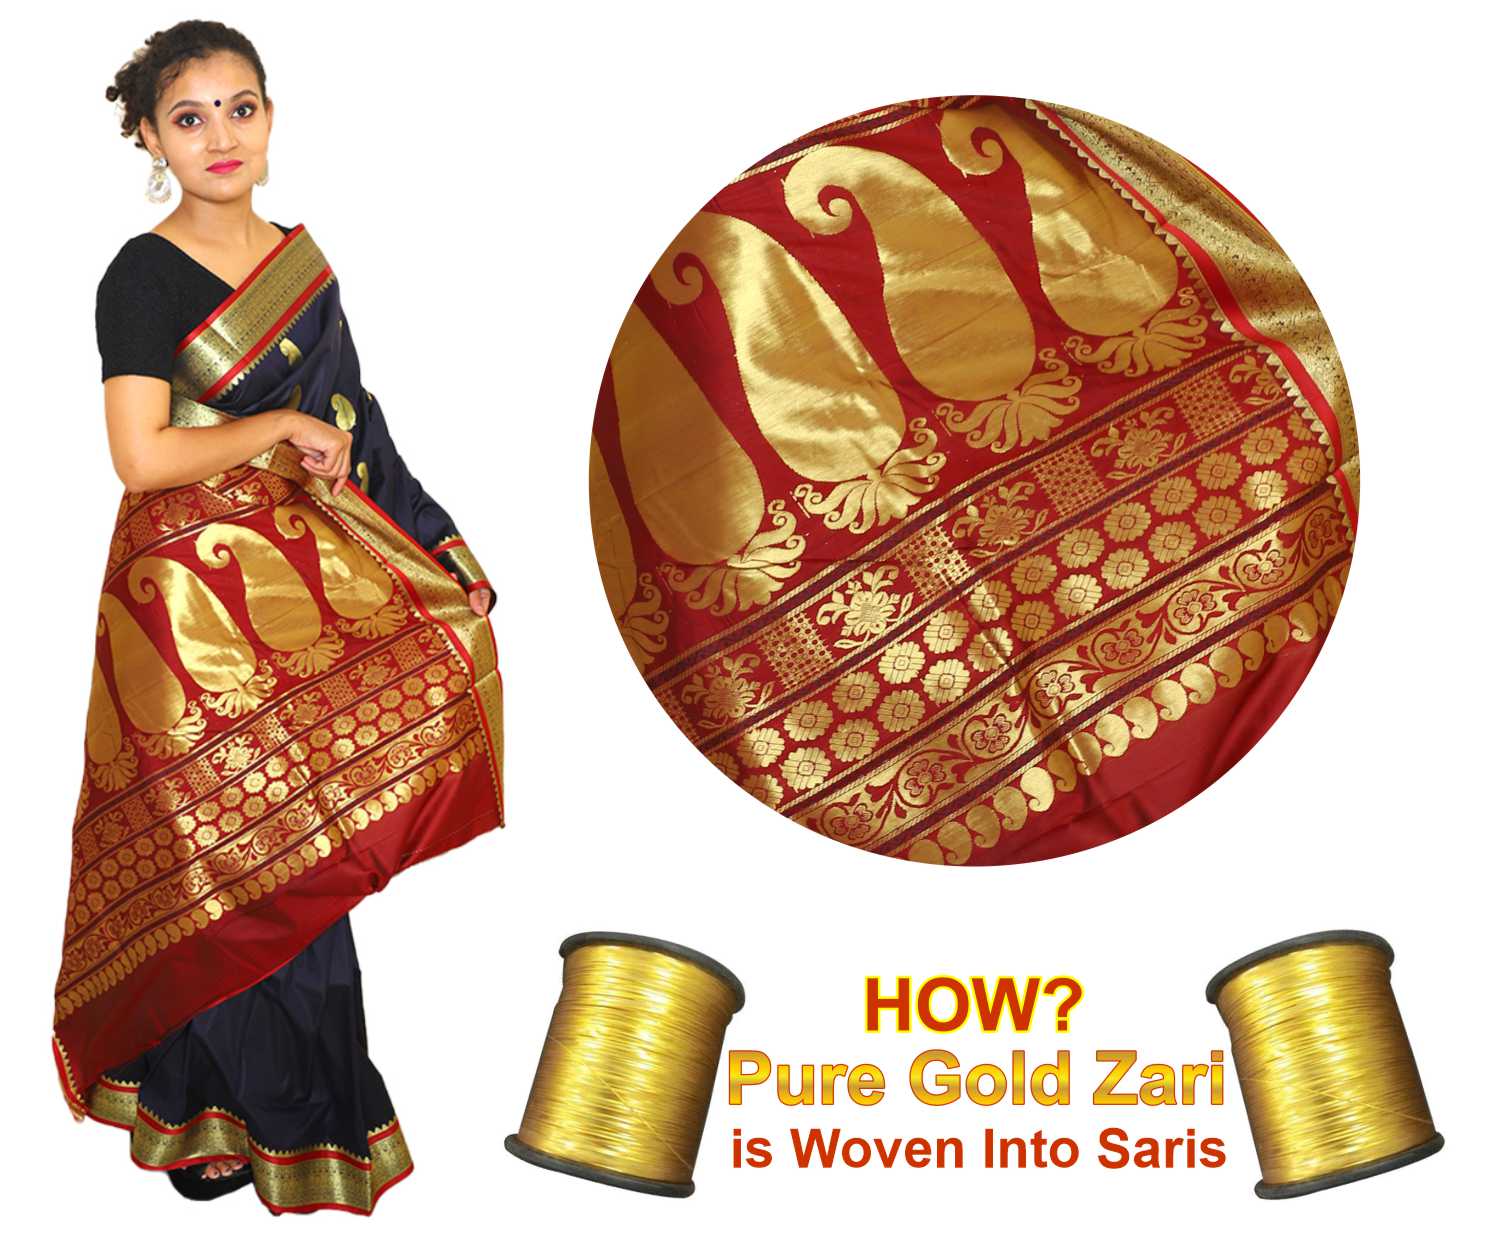 How Pure Gold Zari is Woven Into Saris